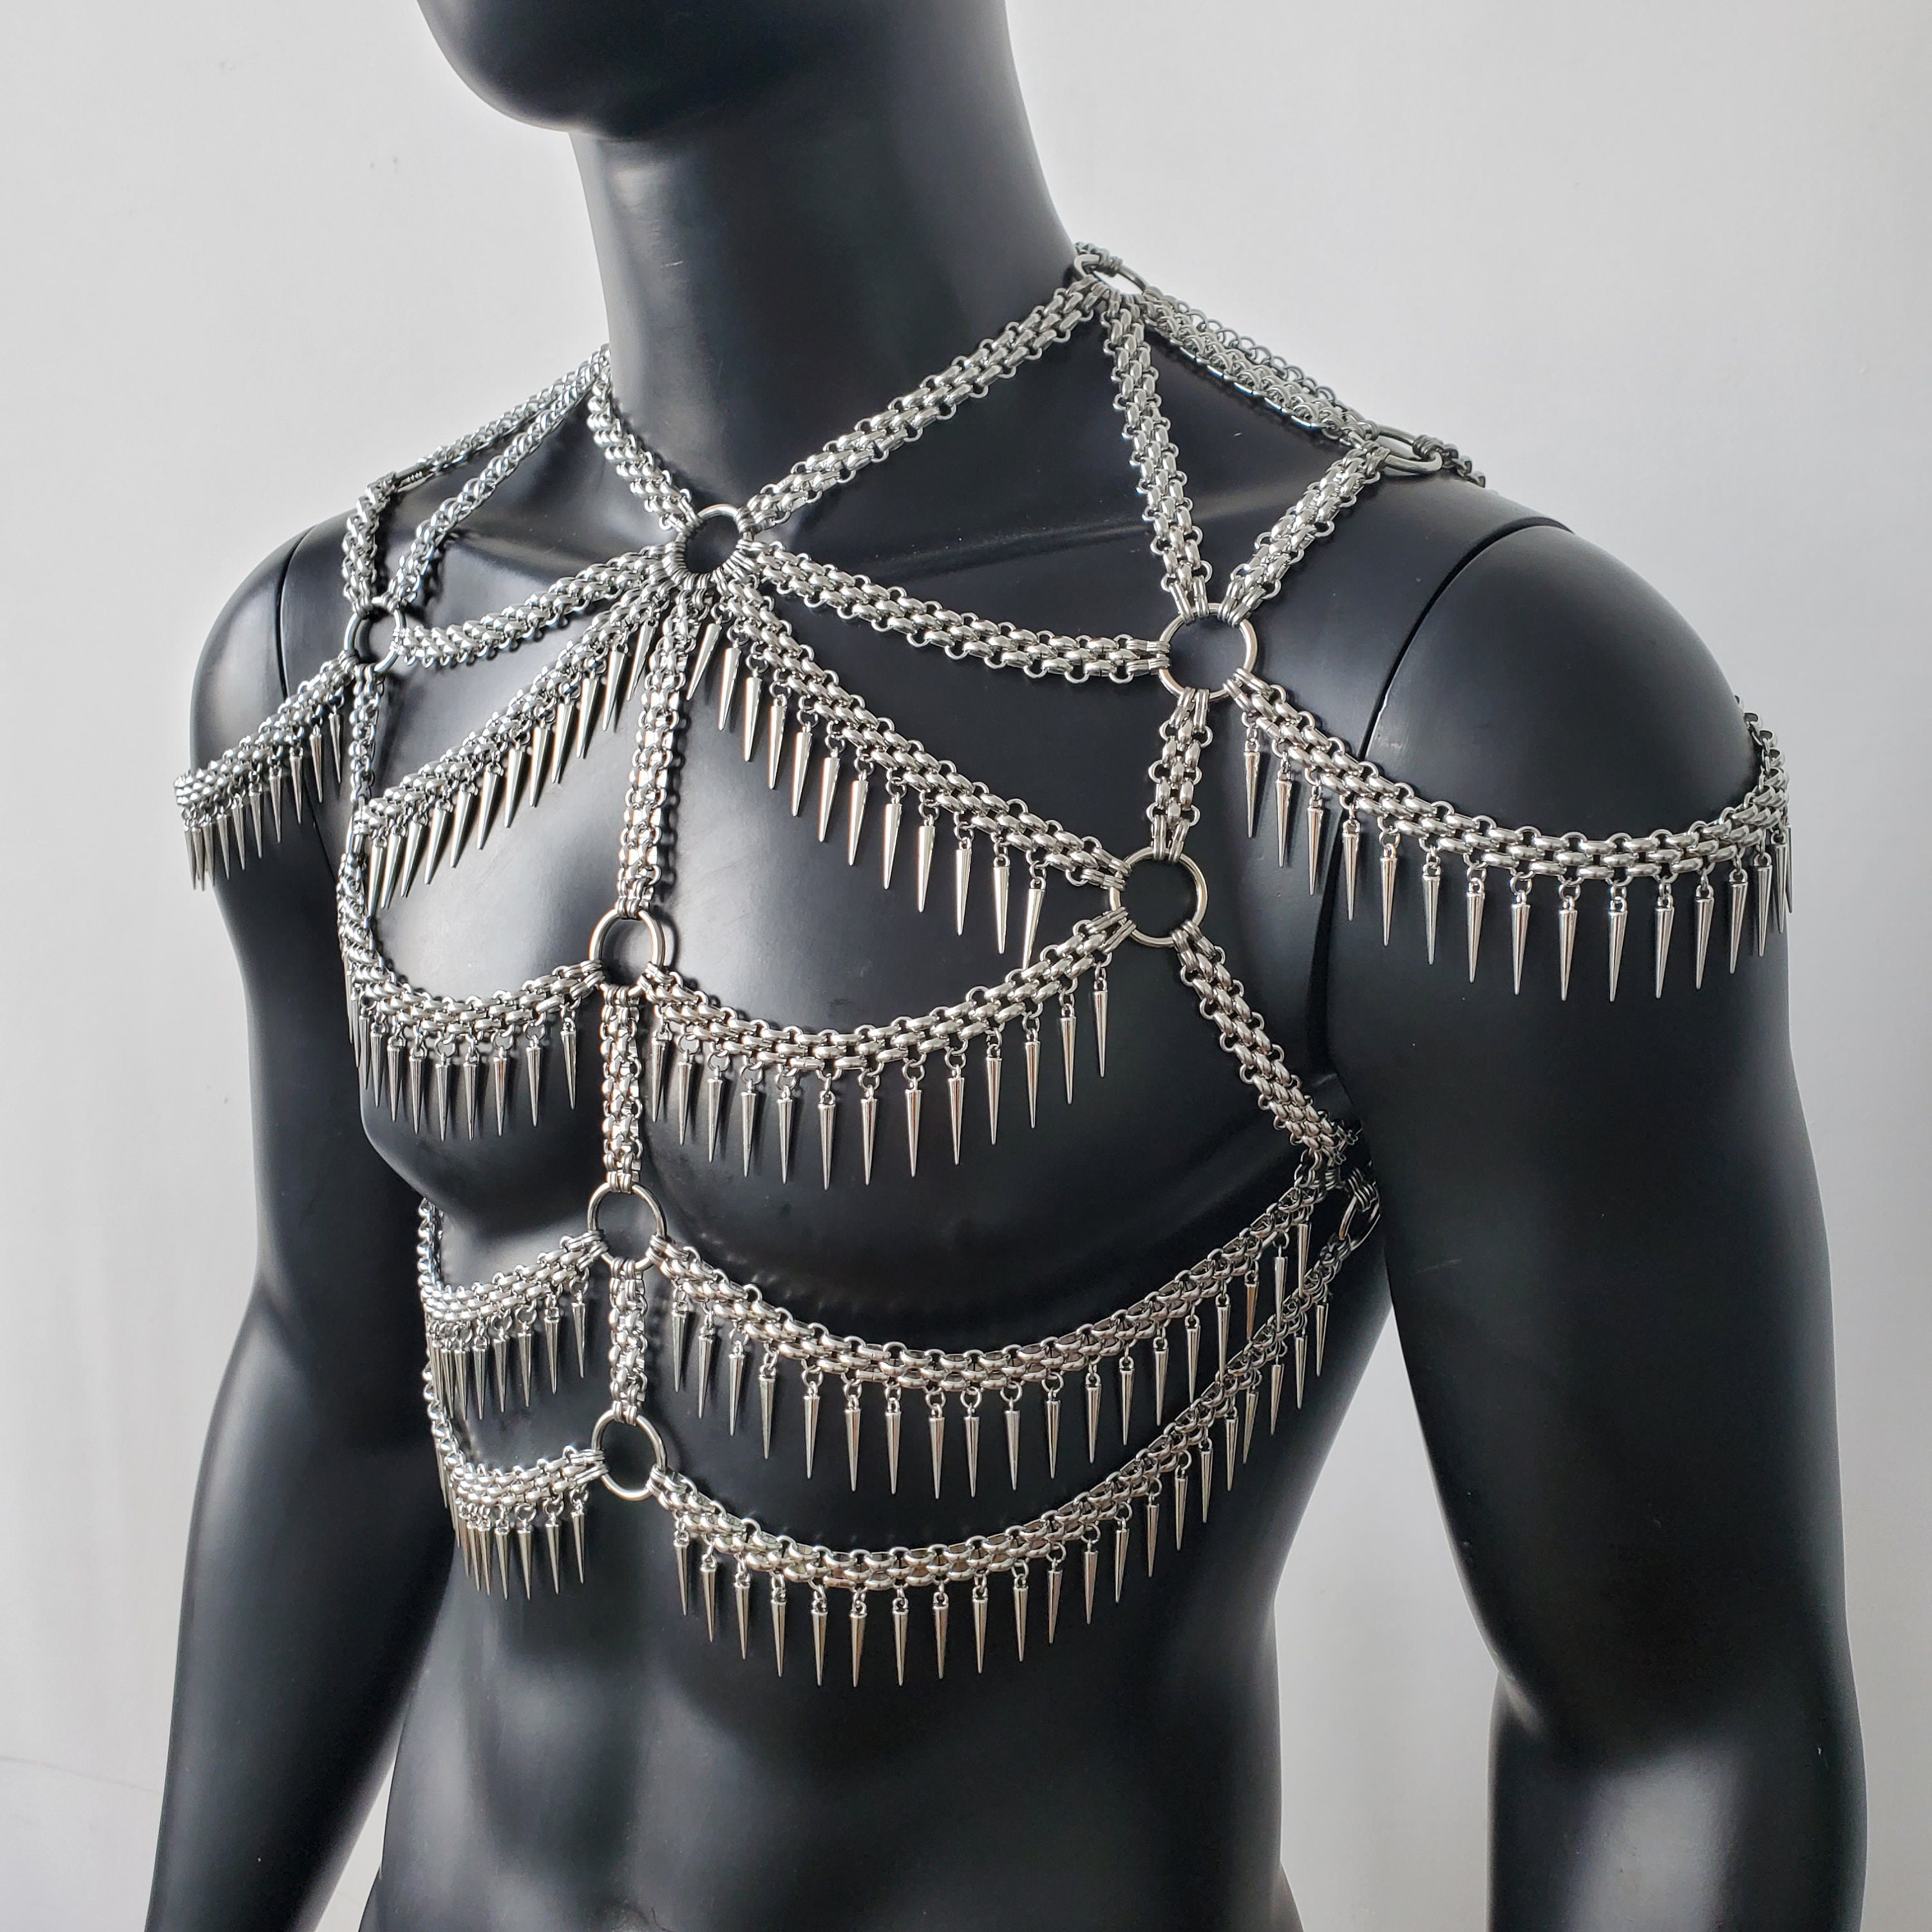 Tits Close Up with Bdsm Spiked Bra. Bdsm Concept. Side View. Copyspace.  Part of Body. Stock Image - Image of necklace, hair: 212073935